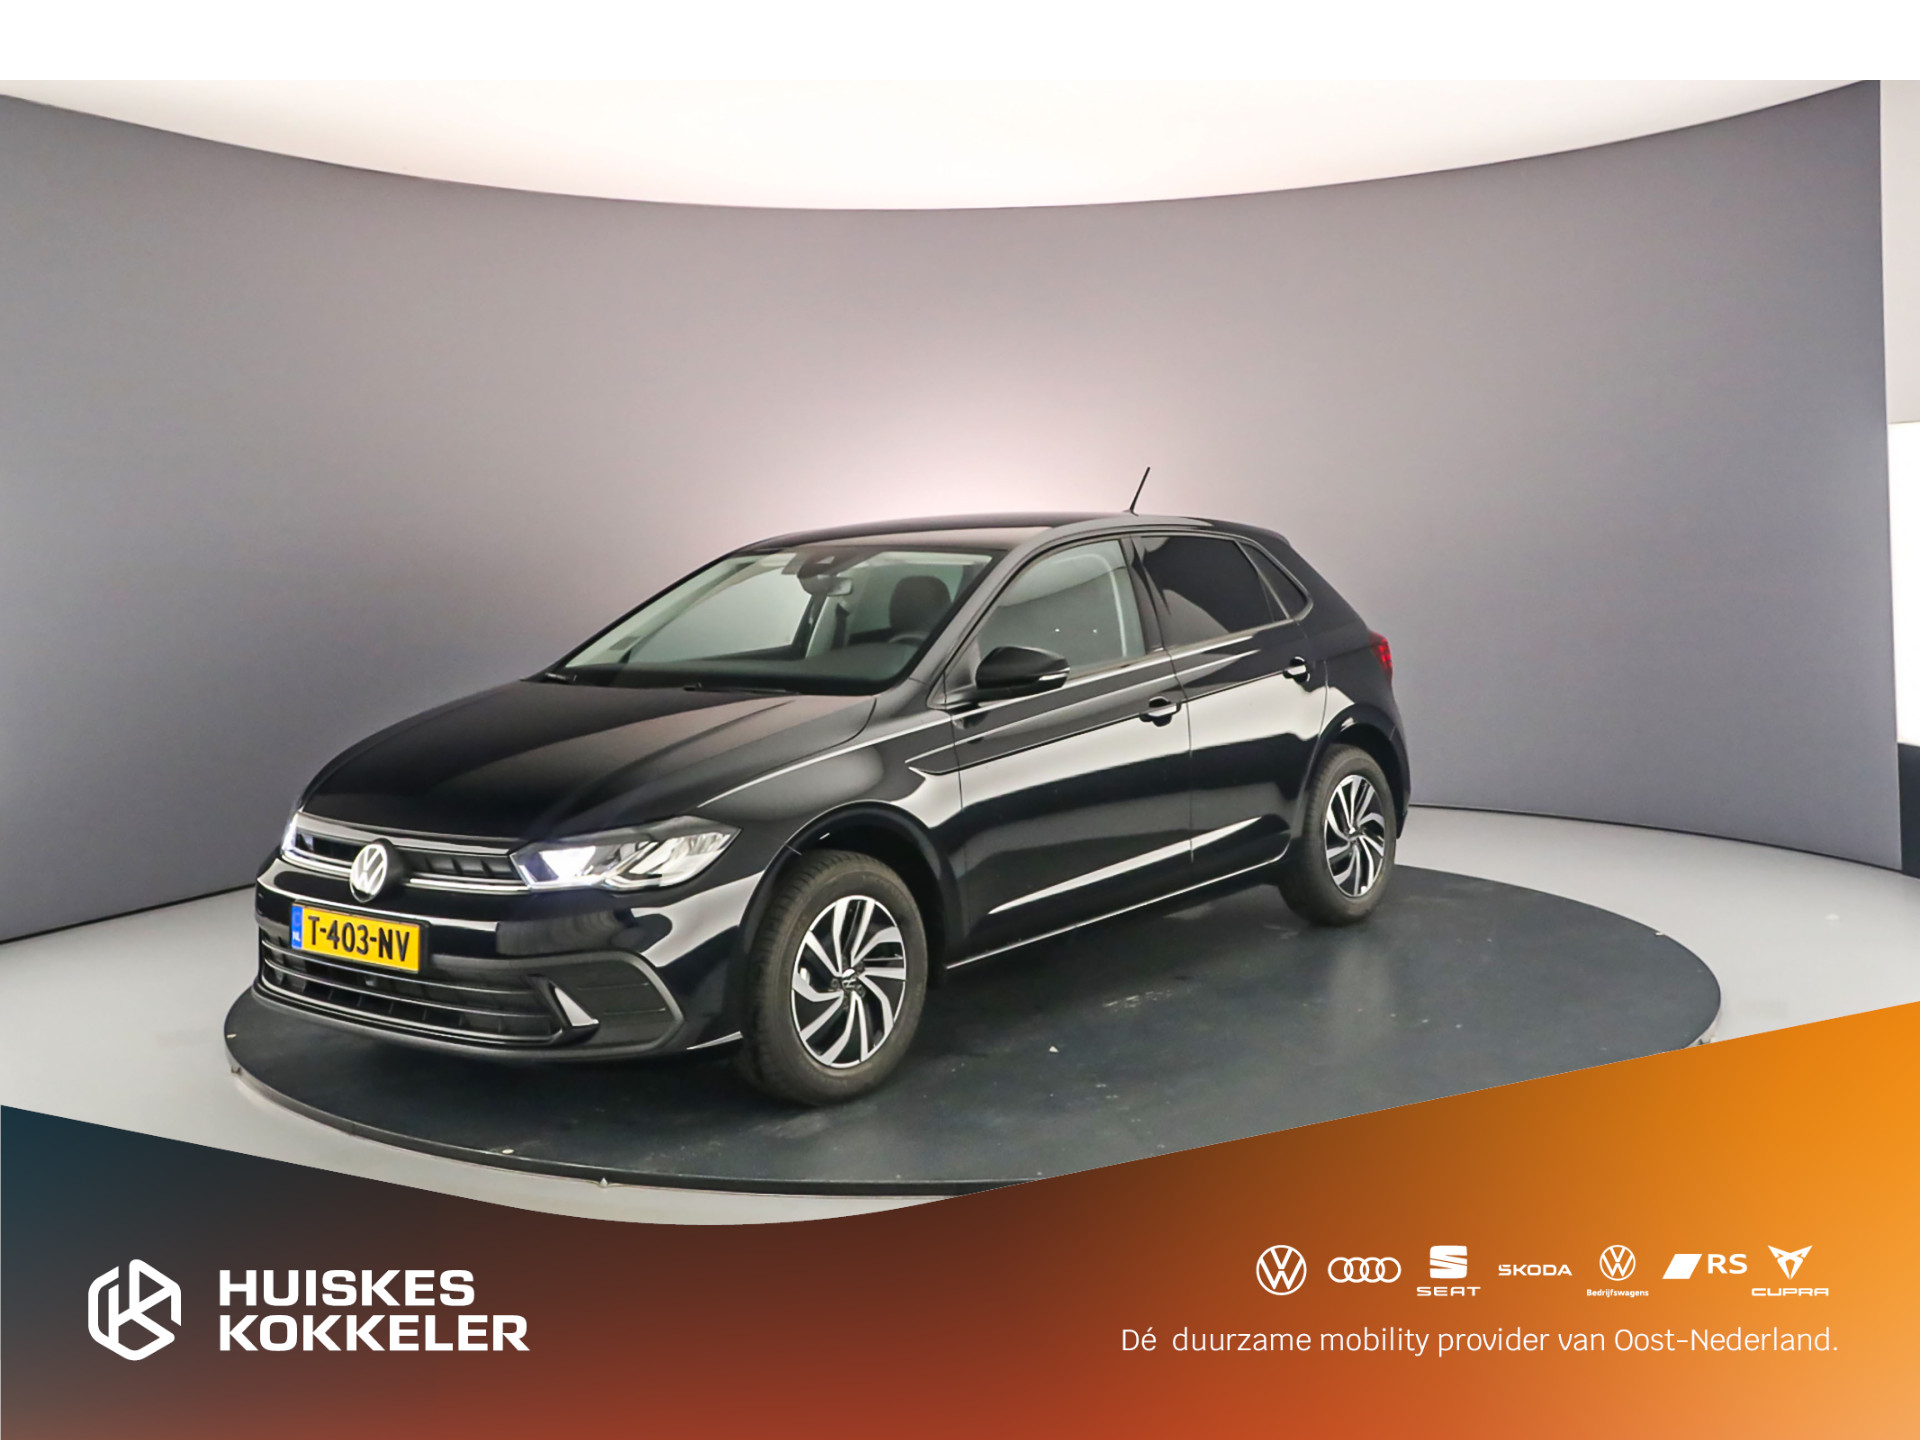 Volkswagen Polo Life 1.0 TSI 95pk Adaptive cruise control, Airco, DAB, LED verlichting, App connect